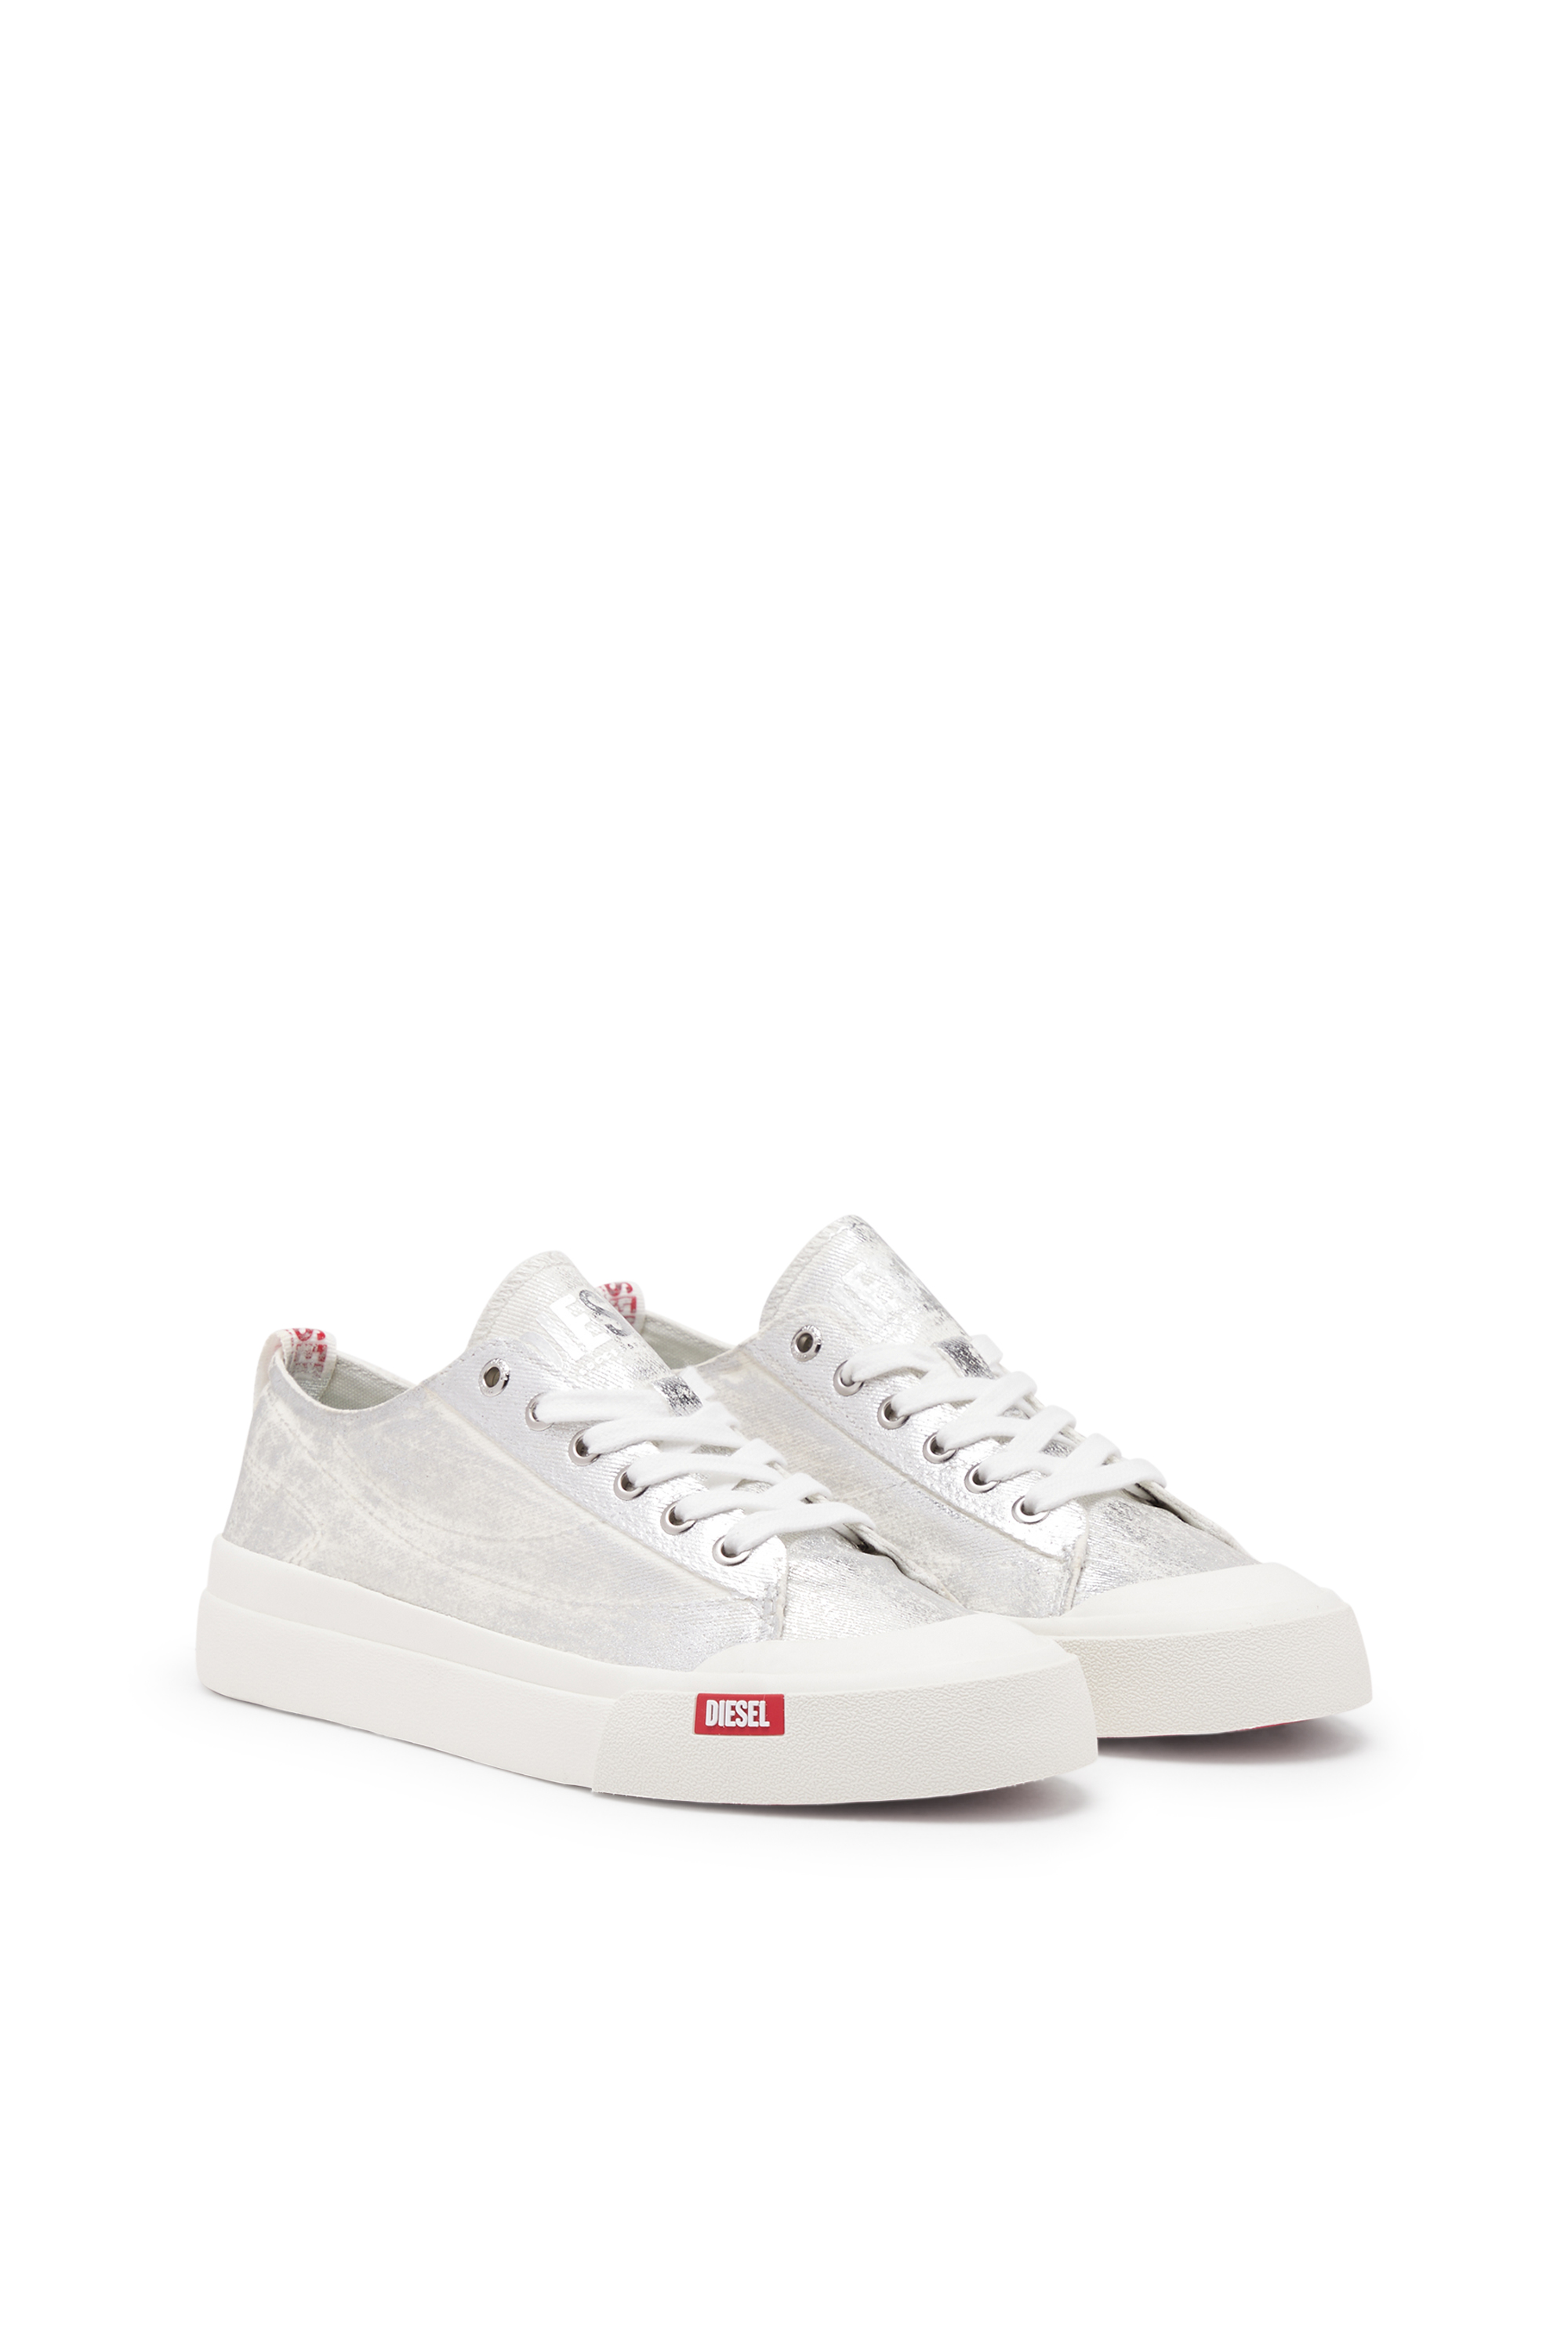 Diesel - S-ATHOS LOW W, Woman S-Athos Low-Distressed sneakers in metallic canvas in Silver - Image 2